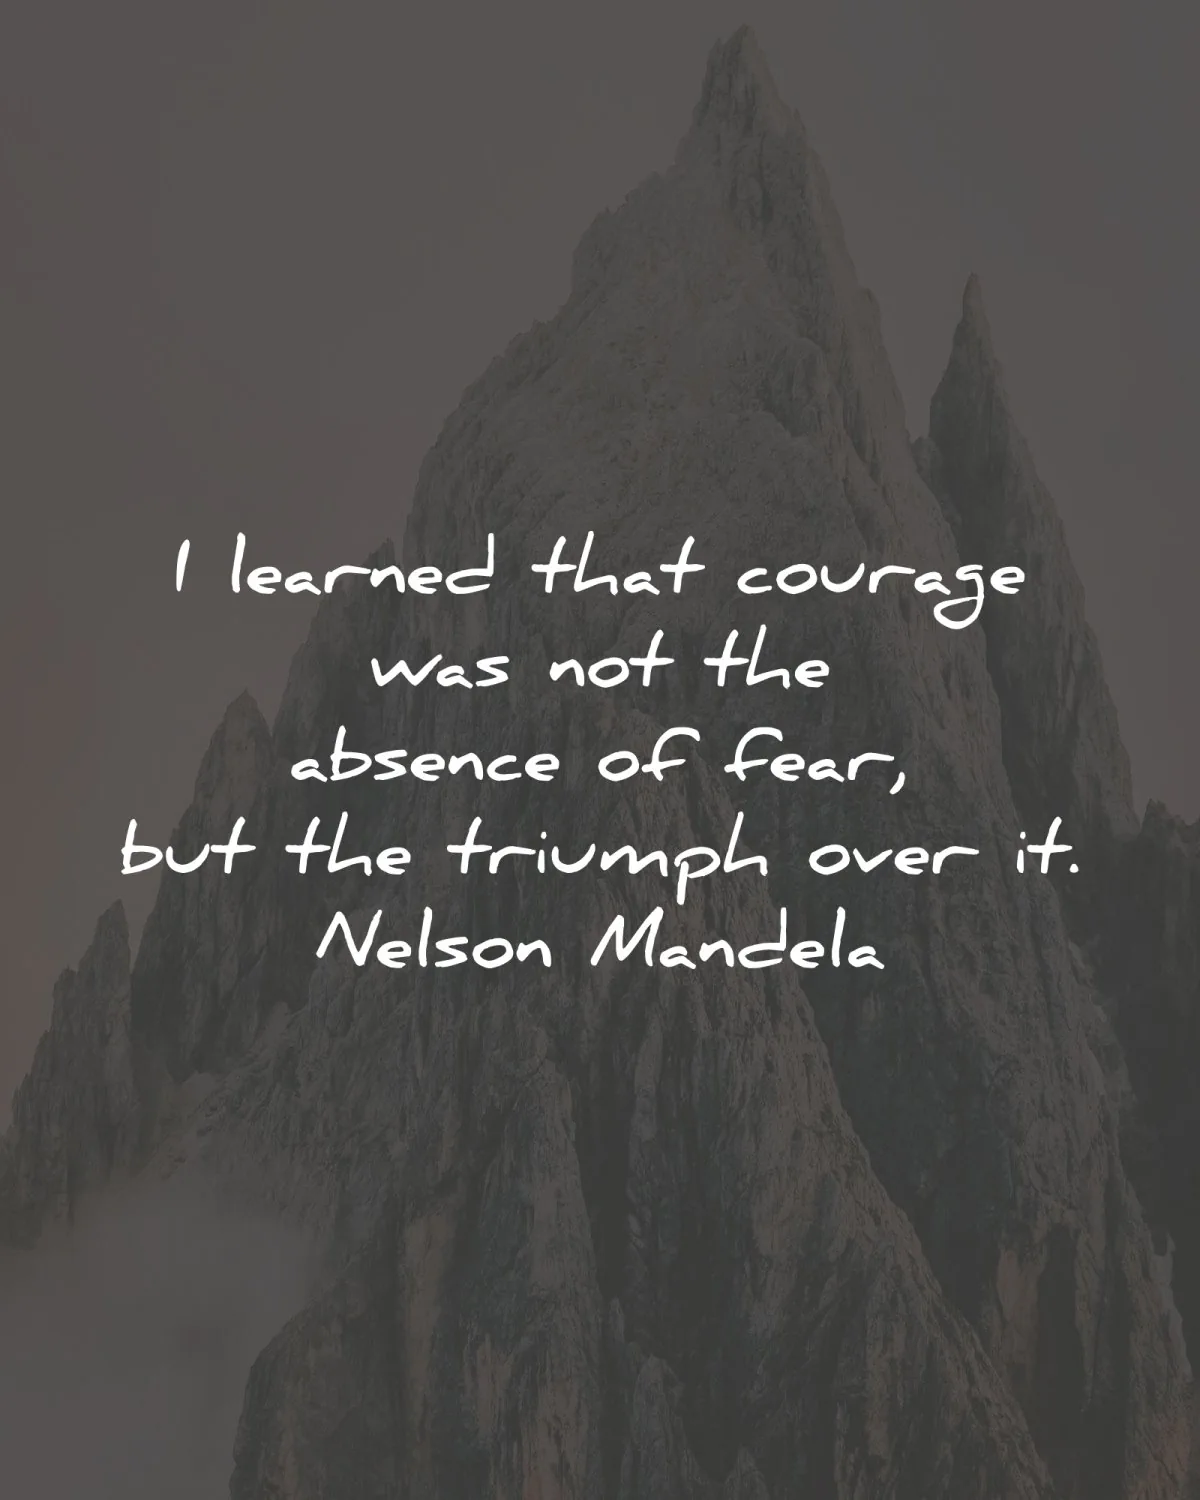 nelson mandela quotes learned courage absence fear wisdom